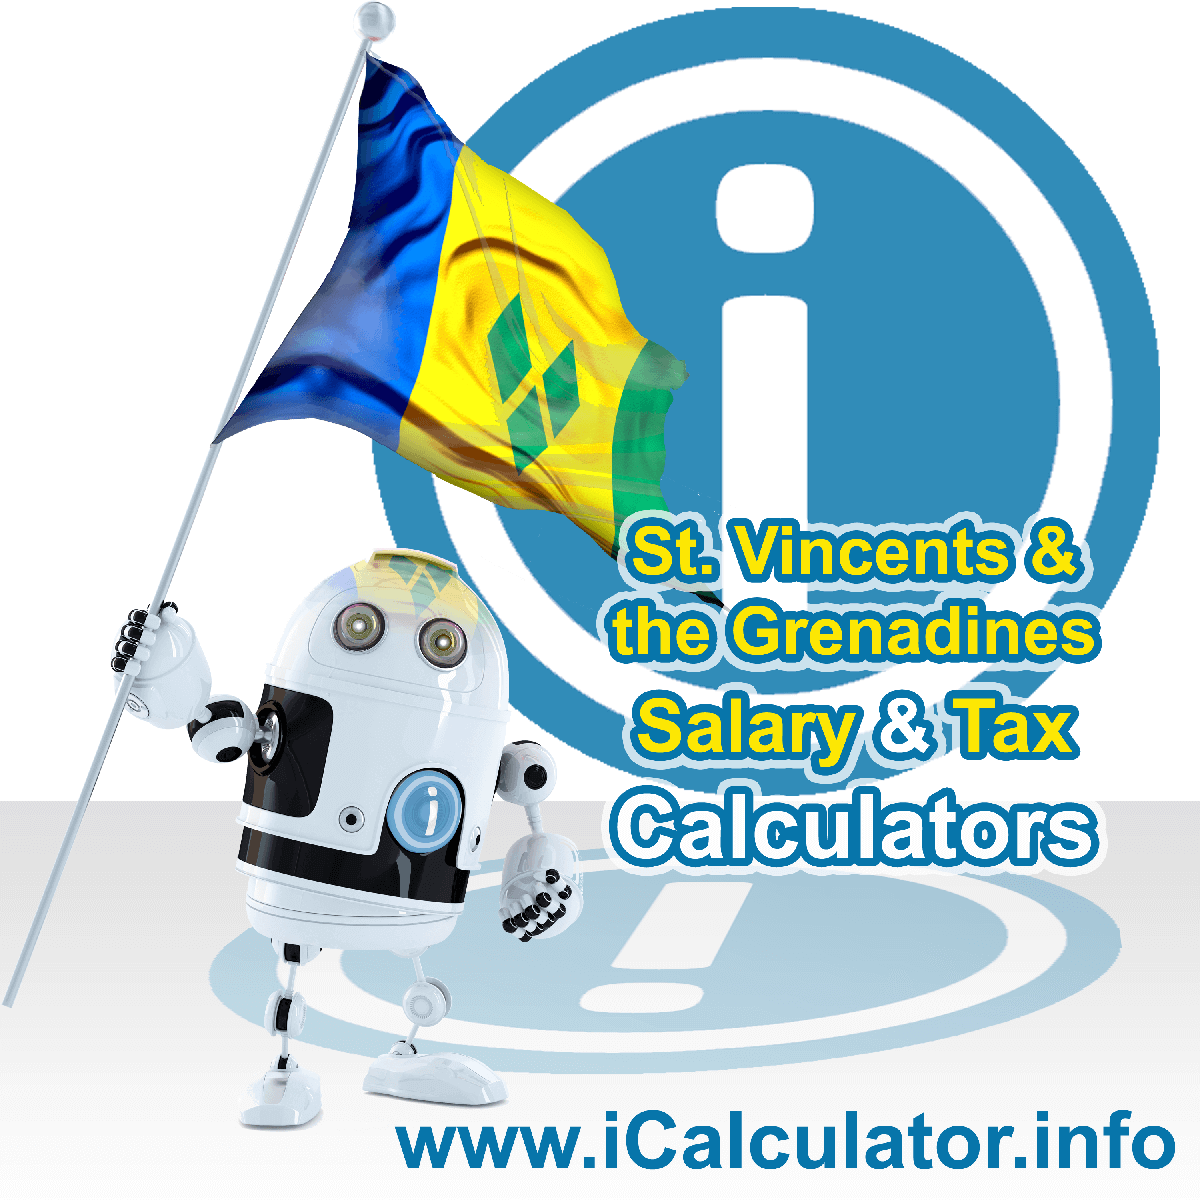 Saint Vincent And The Grenadines Tax Calculator. This image shows the Saint Vincent And The Grenadines flag and information relating to the tax formula for the Saint Vincent And The Grenadines Salary Calculator